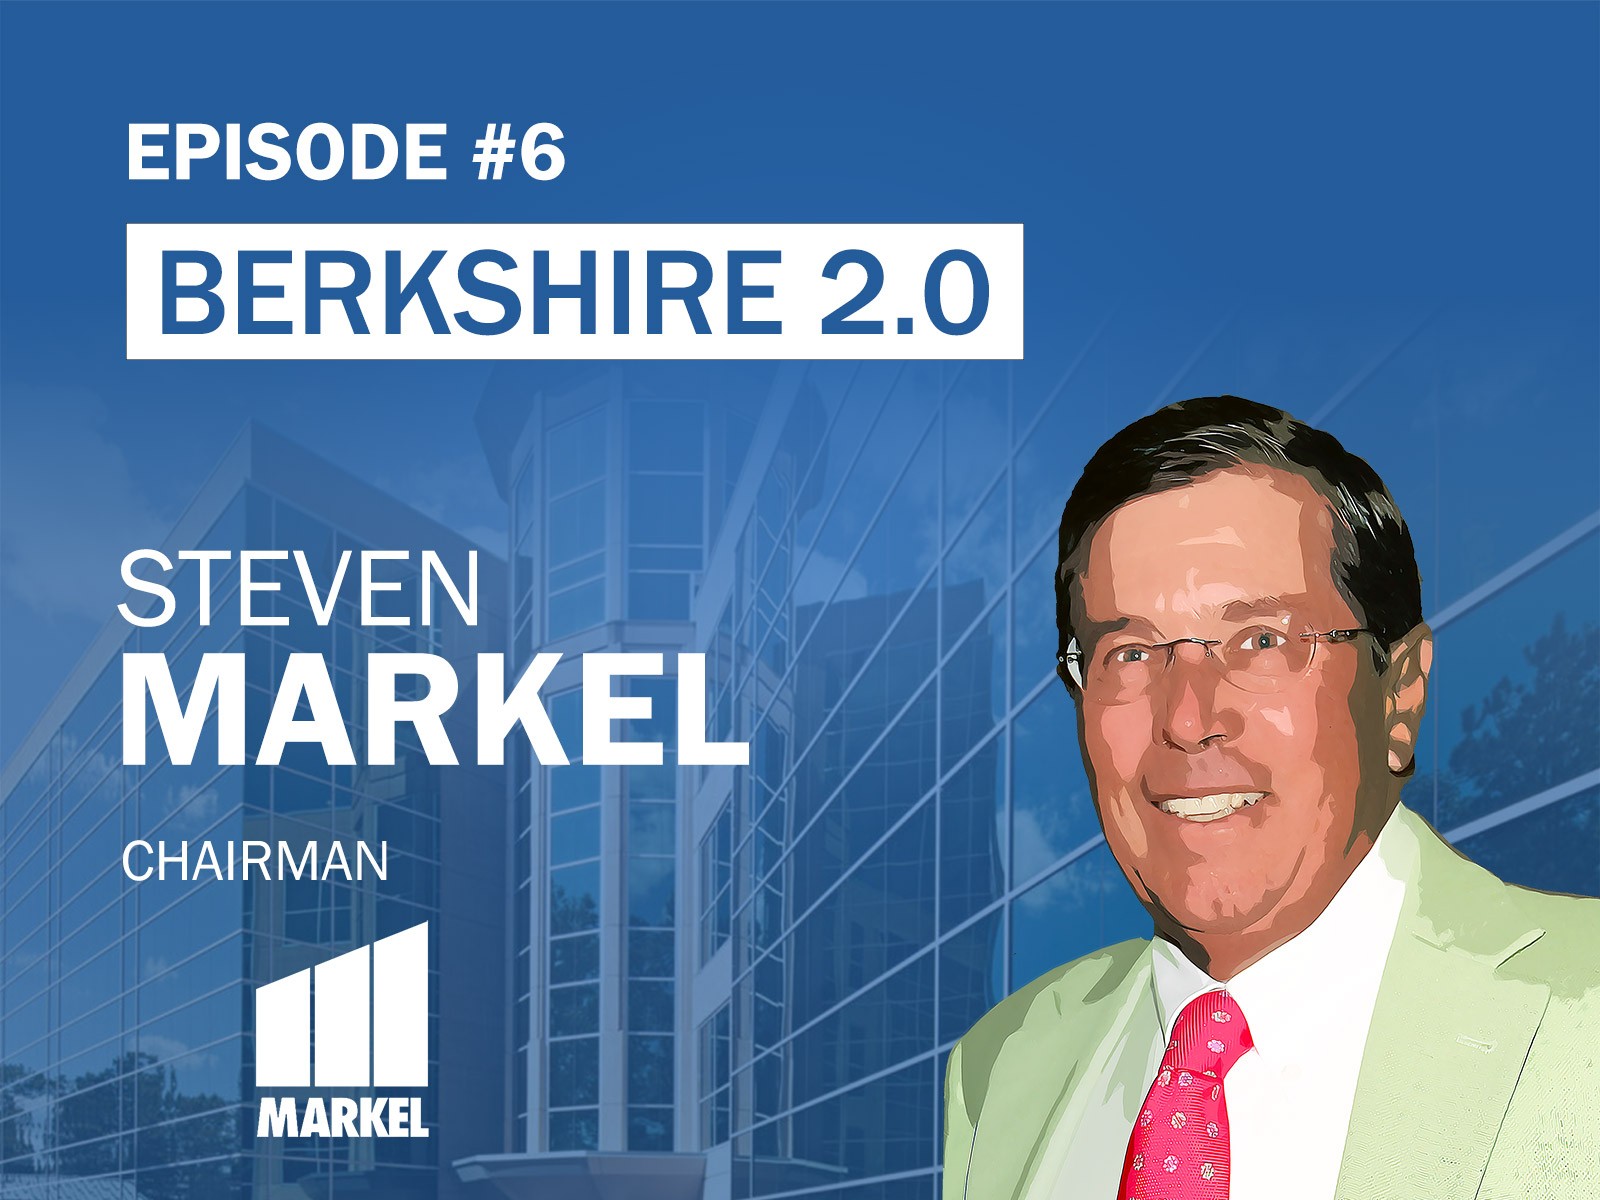 Steven Markel is the chairman of Markel Corporation, a Richmond, Virginia-based holding company with extensive global insurance operations. After attending Wharton and a stint as a commercial banker, Steve joined Markel with his cousins as the third generation in 1975. The company was listed in 1986, with a market cap of $15 million and today, Markel is a Fortune 500 company with a $15 billion market cap. As the group evolves into new areas like insurance-linked securities, Steve firmly believes Markel’s brightest days are ahead.